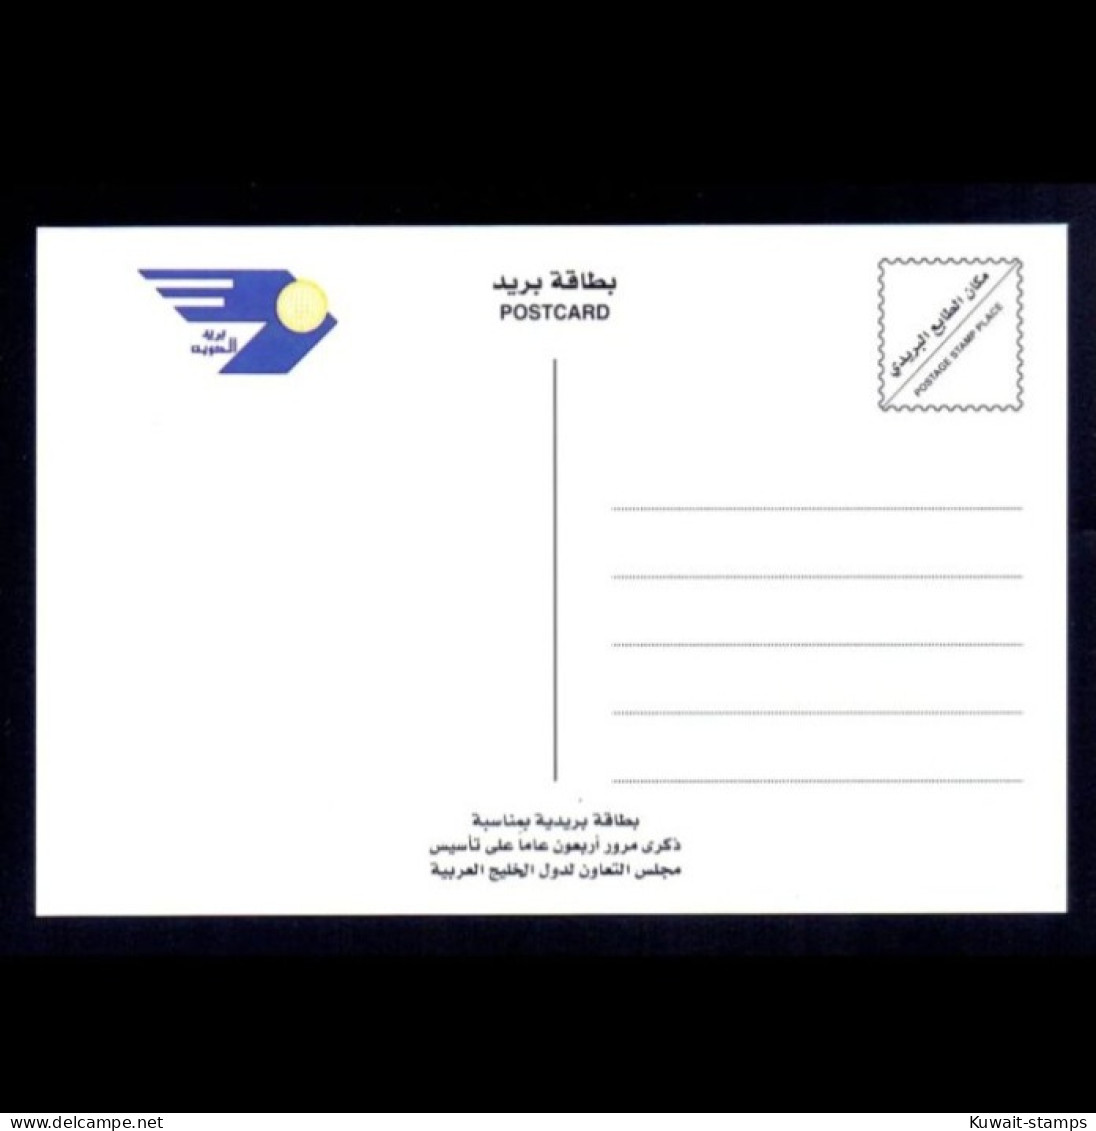 Kuwait 2022 - Official Postcard  Stamp Image Of Kuwait Joint Issues 40th Anniversary Of G.C.C 2022 - Kuwait